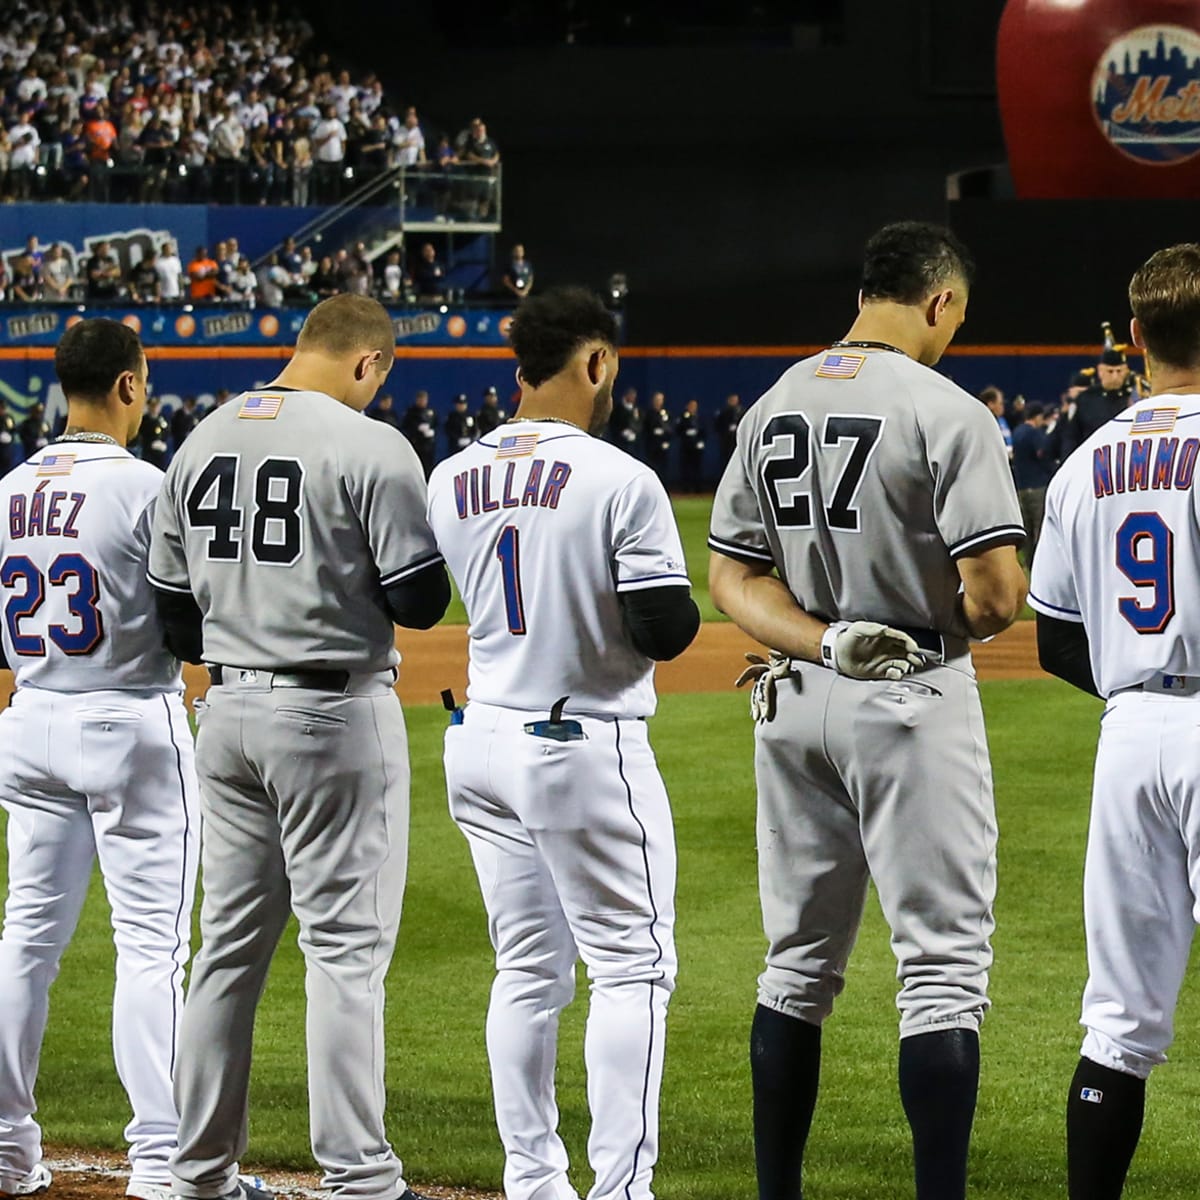 9/11: Yankees, Mets toe line together as one unified New York